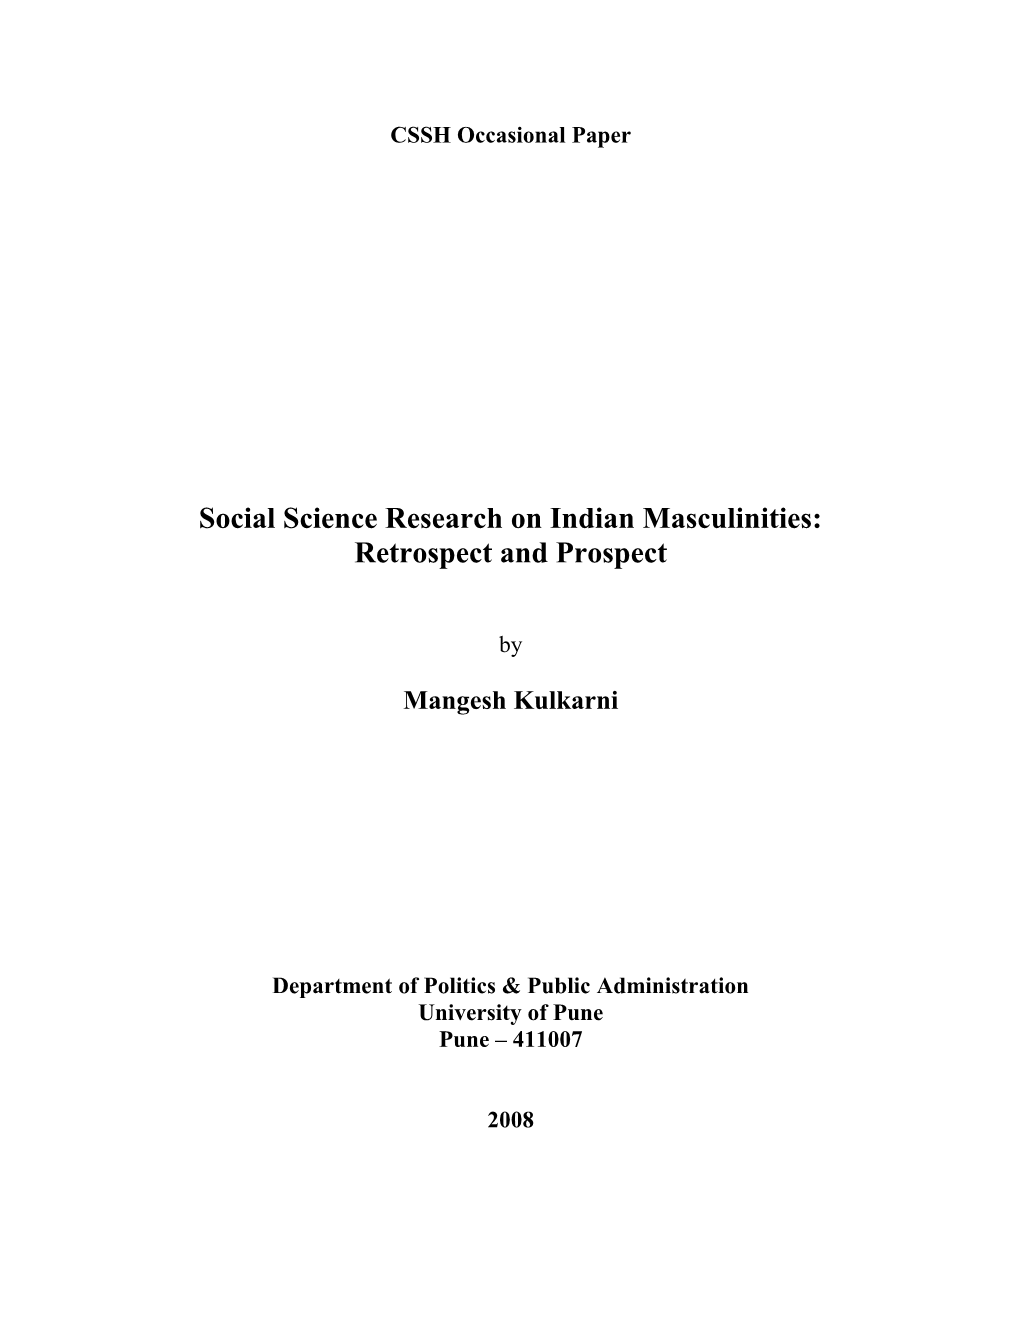 Social Science Research on Indian Masculinities